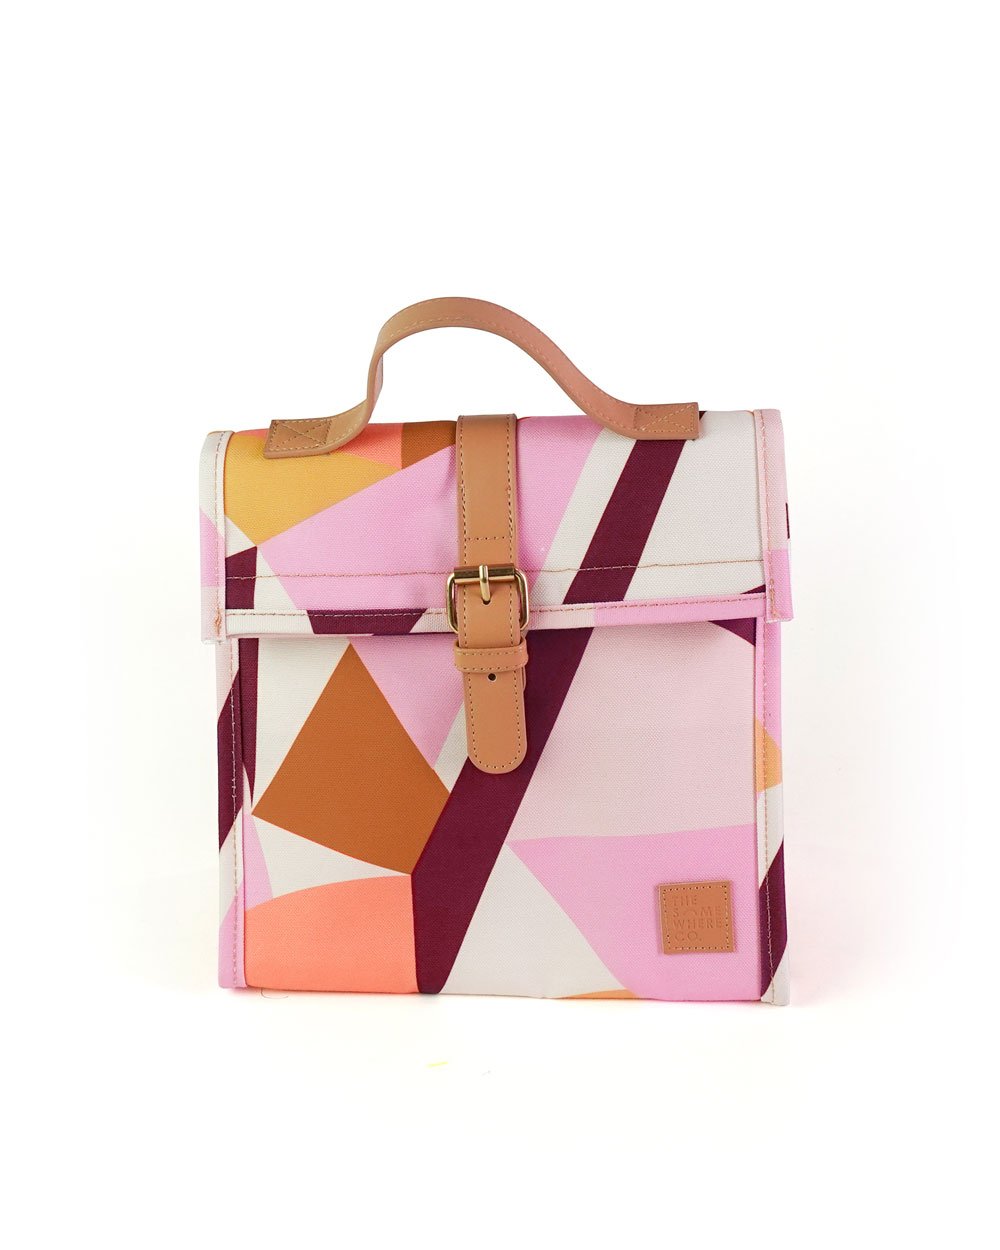 Kaleidoscope Lunch Satchel with Strap